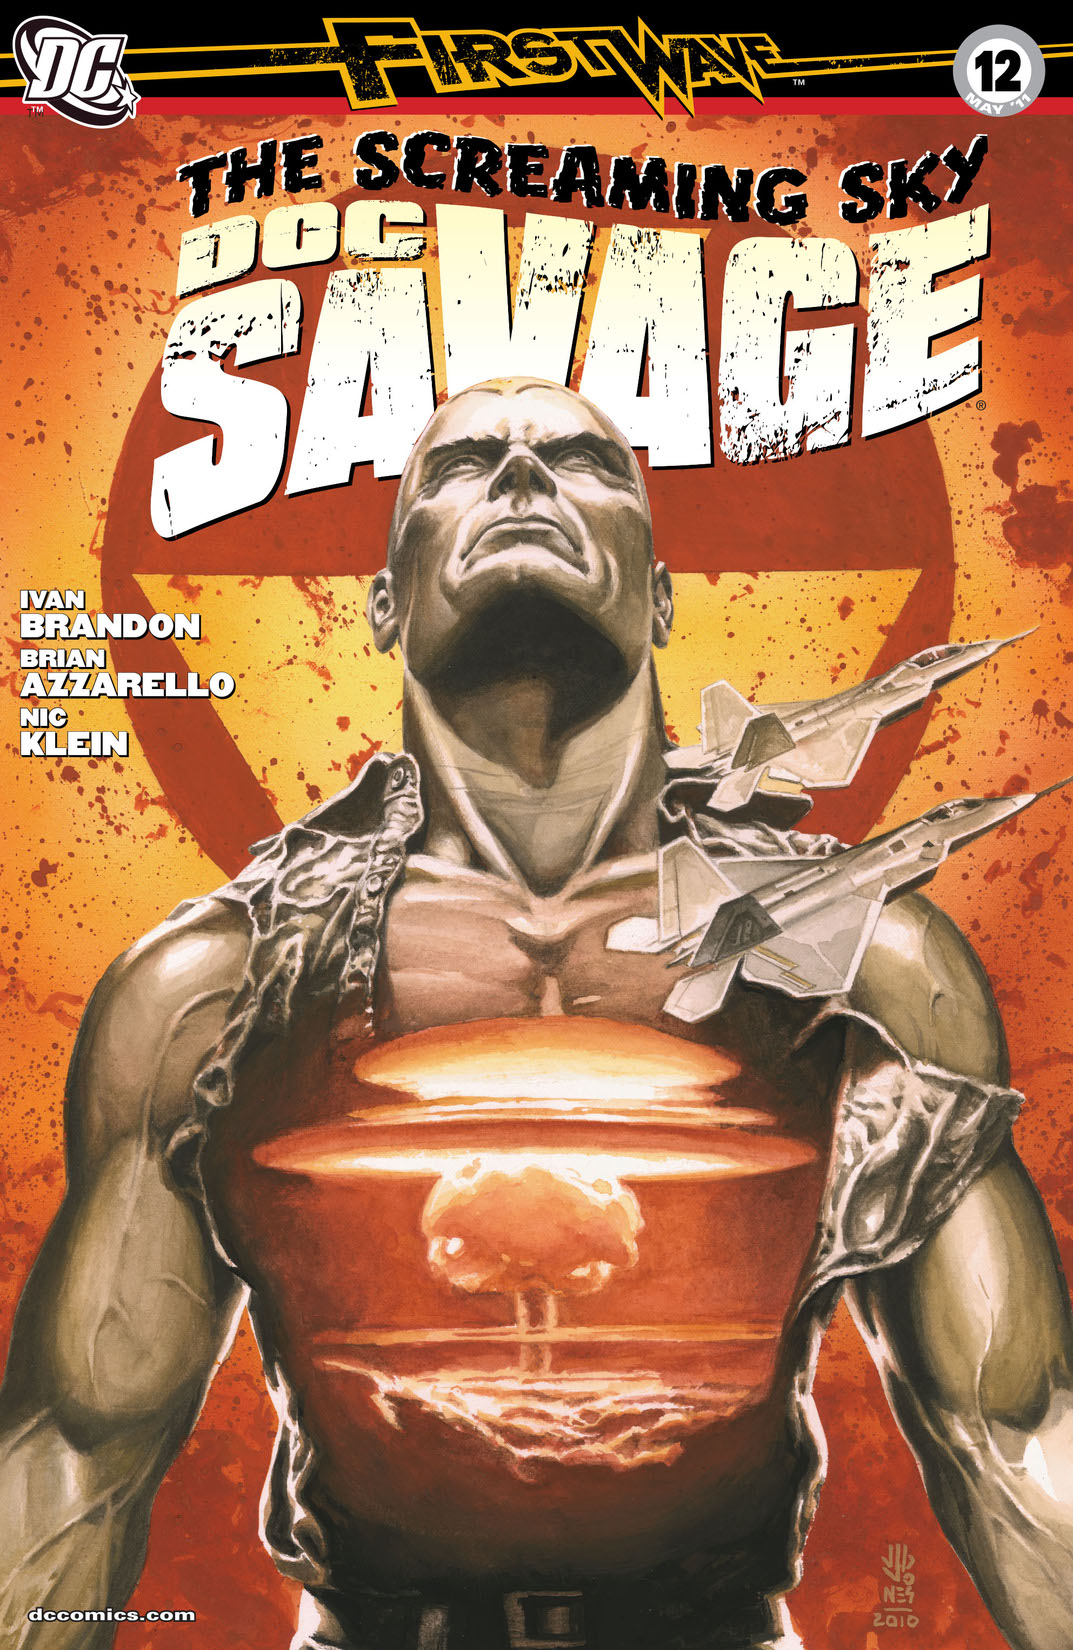 Doc Savage #12 preview images